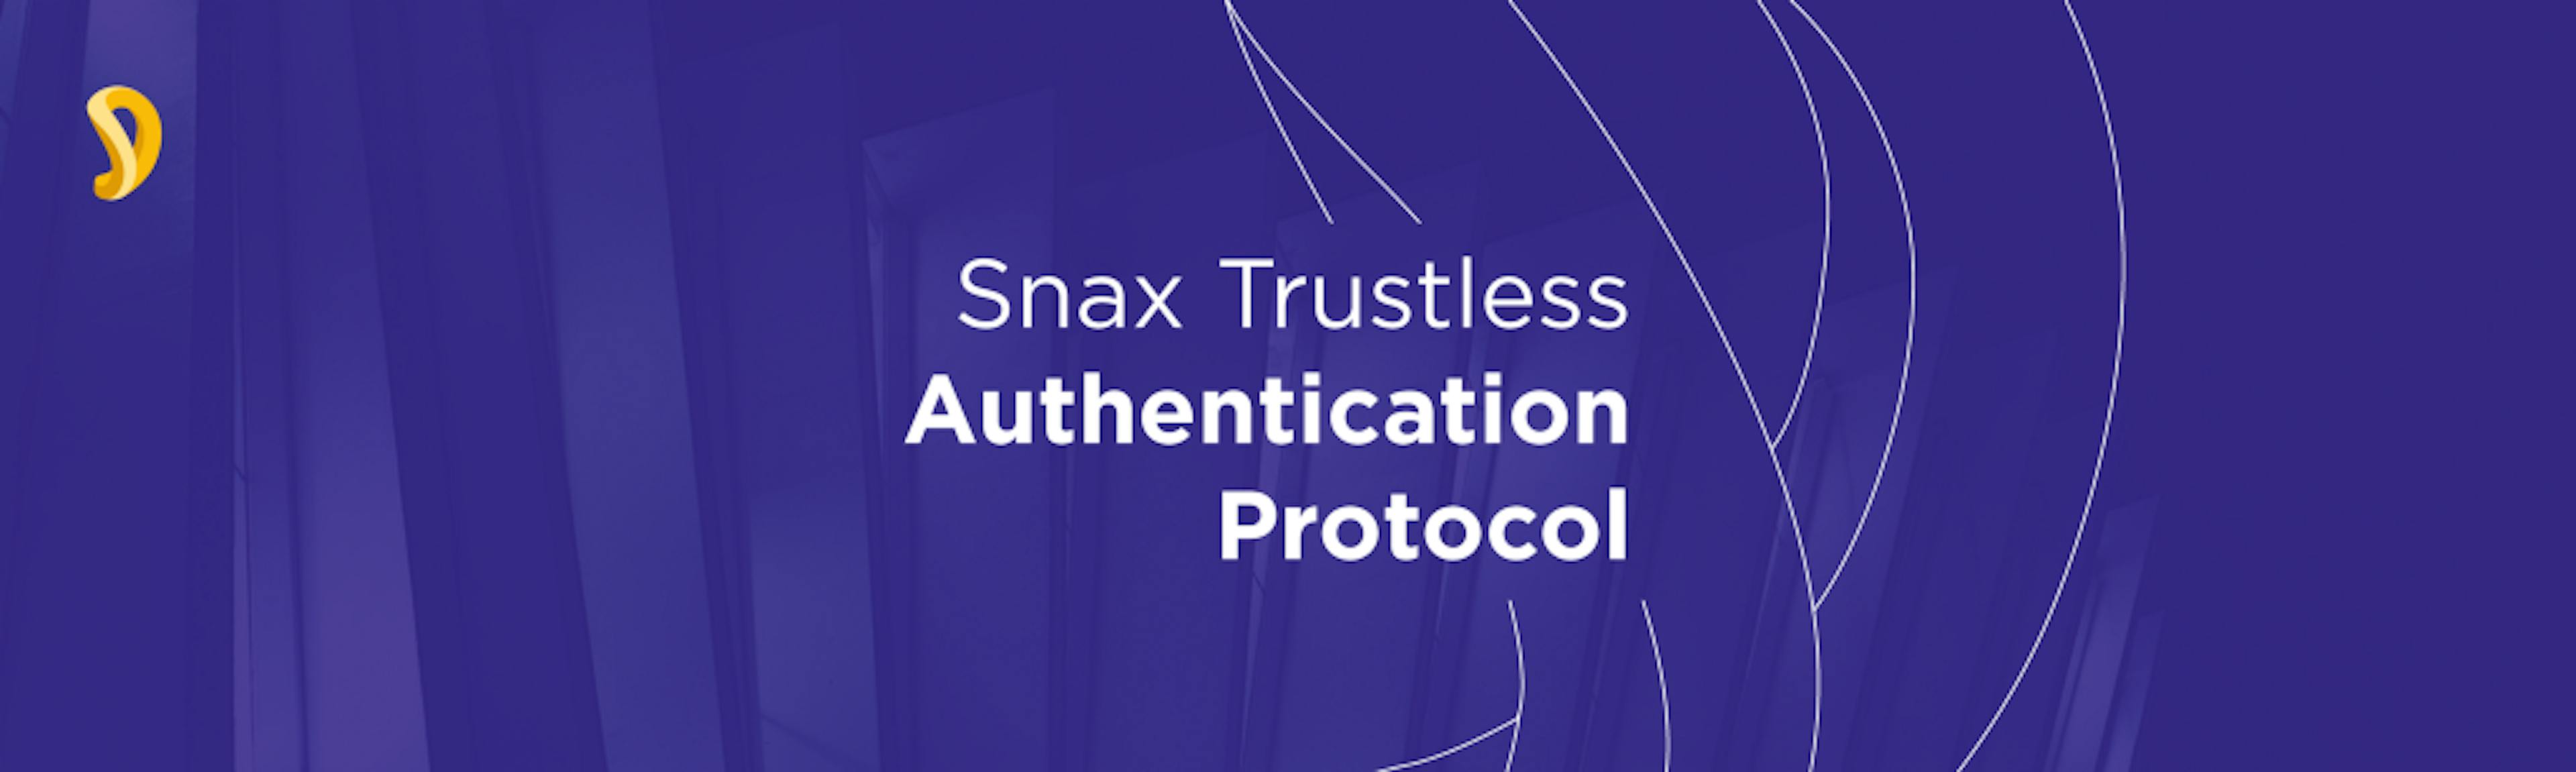 /snax-trustless-authentication-protocol-f925216ae7d2 feature image